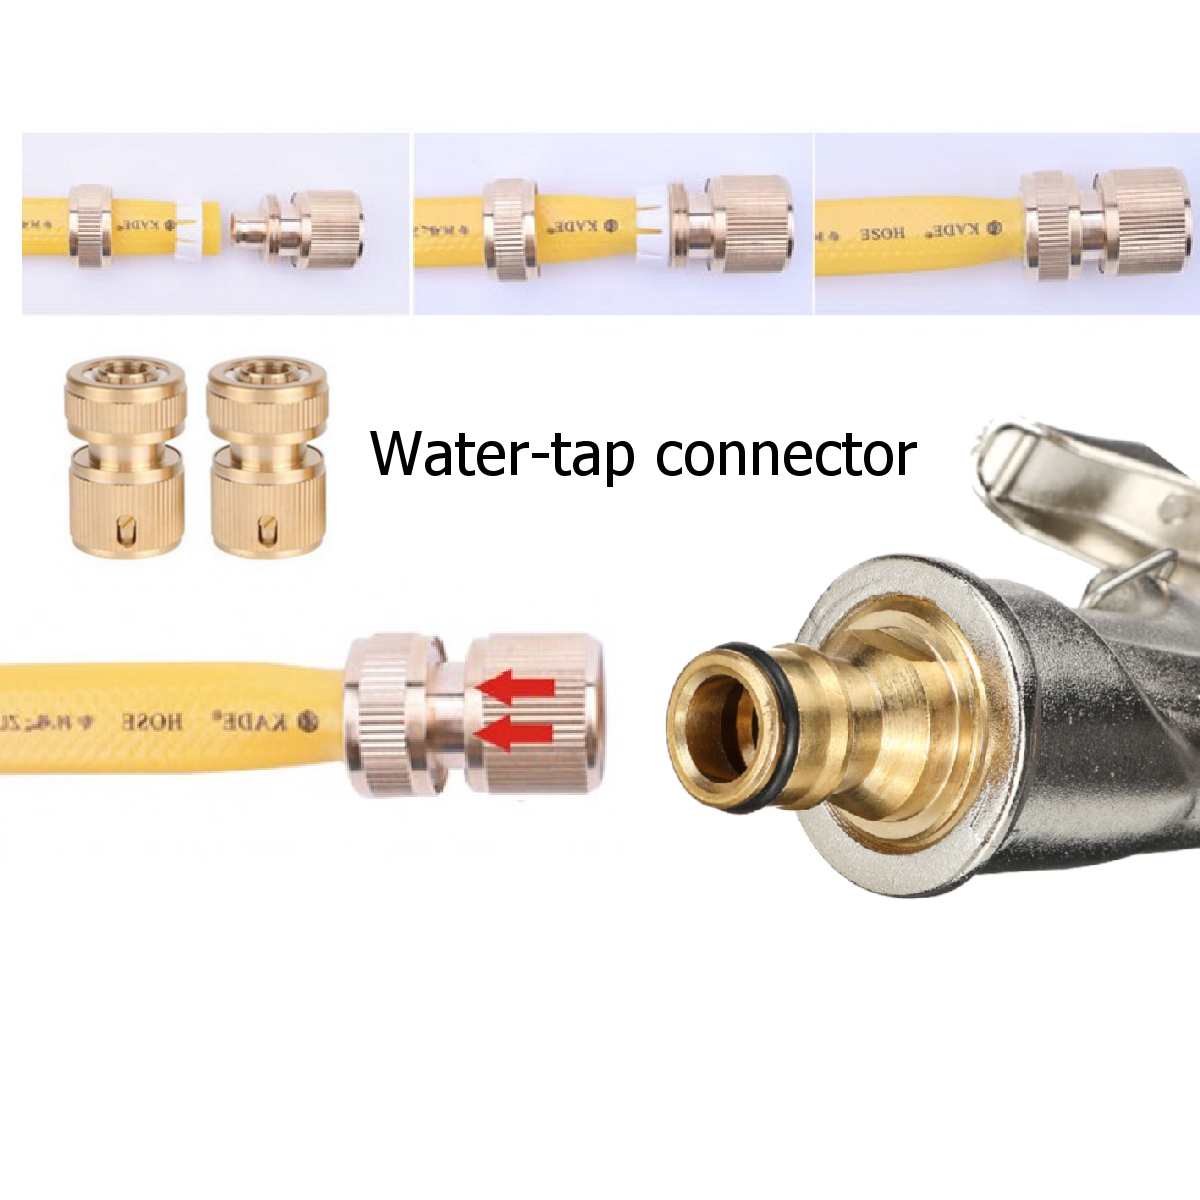 High-Pressure-Brass-Washer-Misting-Spray-Nozzle-Water-Adapter-Connector-Water-Hose-Pipe-Connectors-1537342